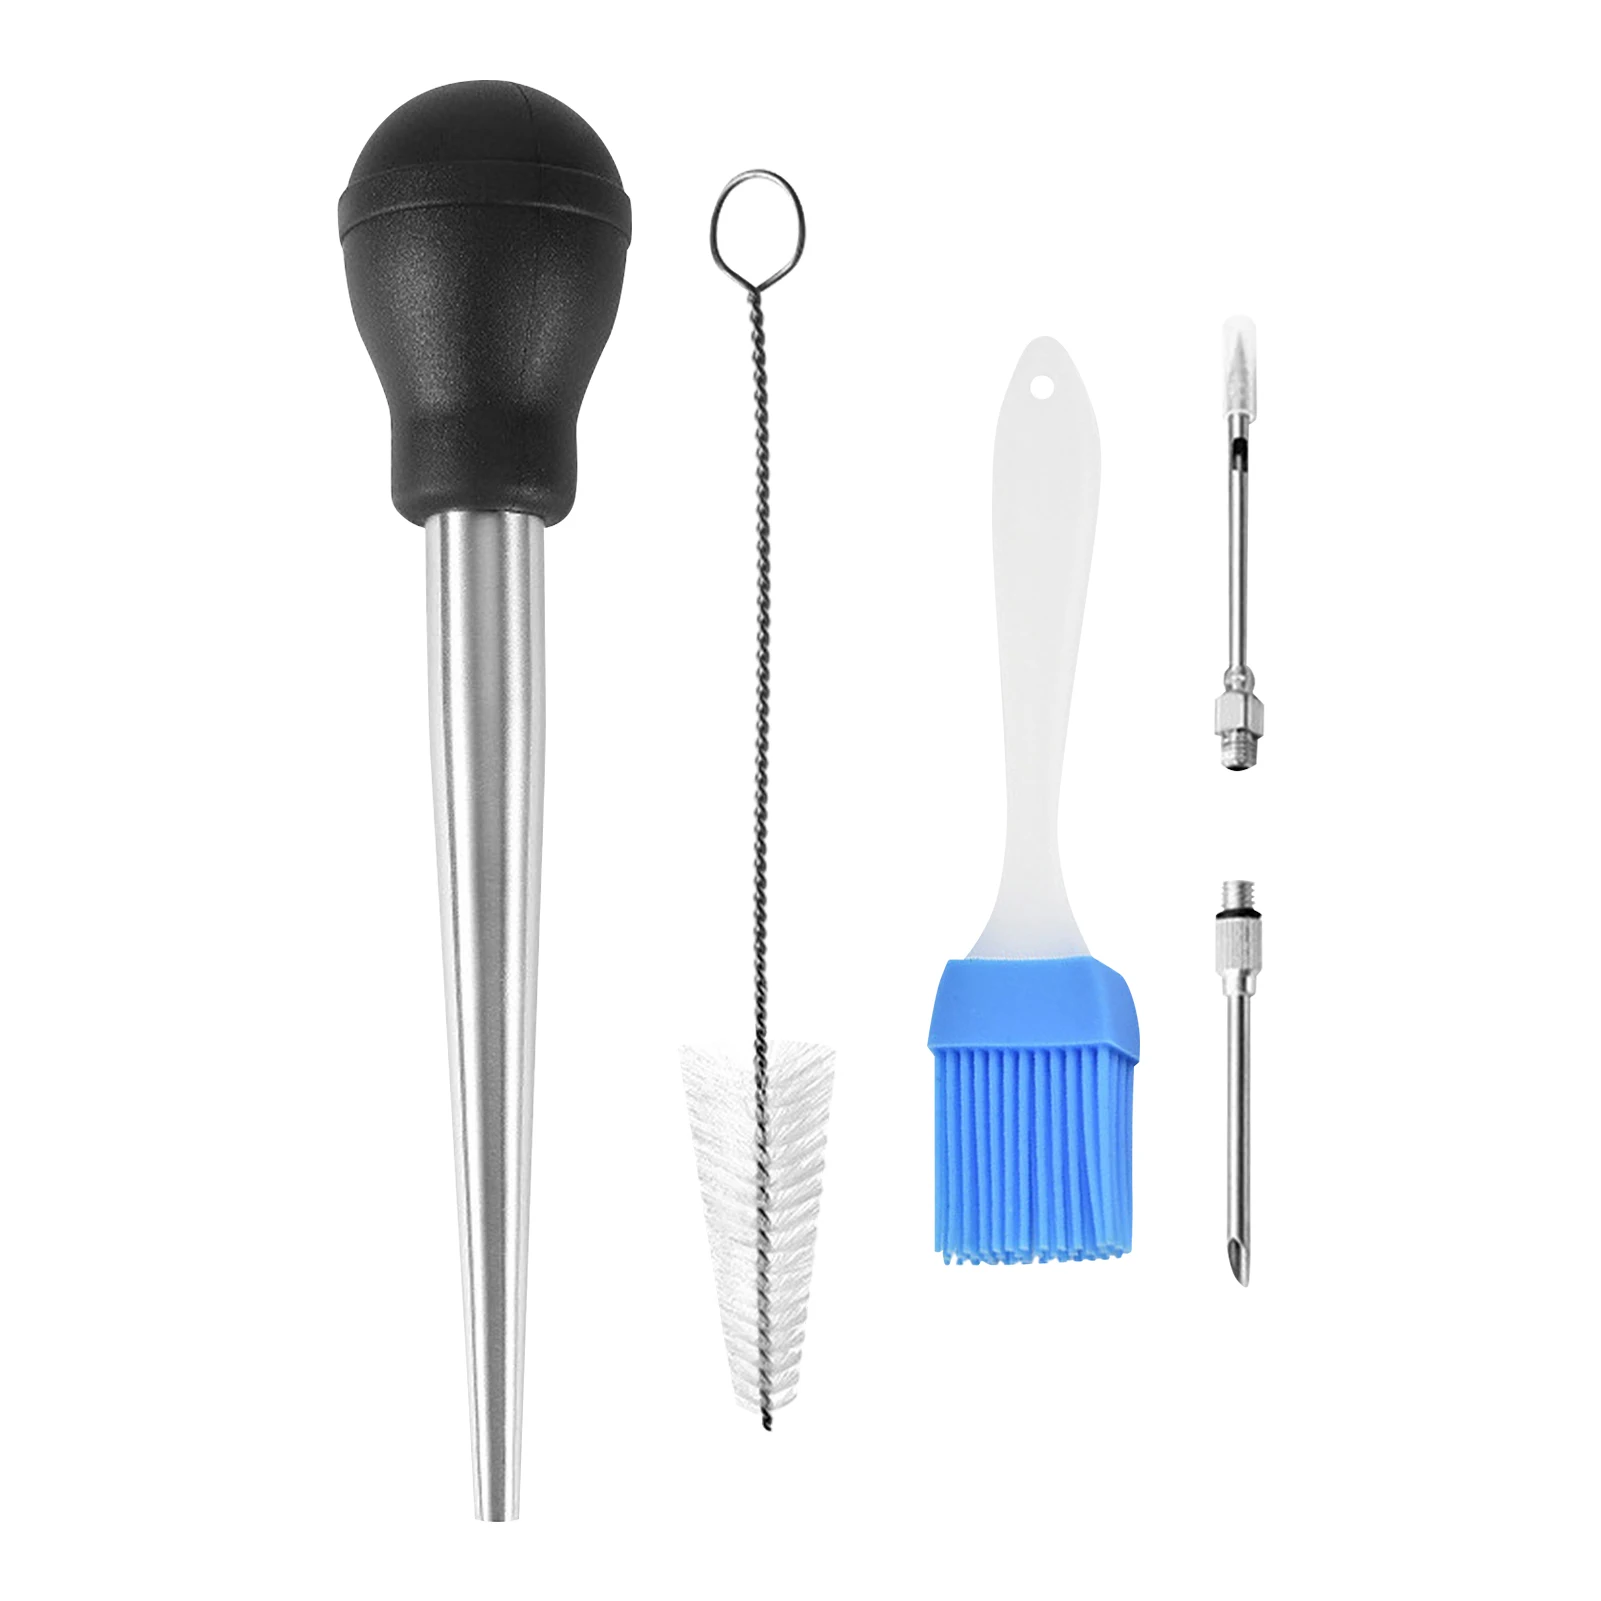 

Ergonomic Marinade Meat For Cooking Safety Steak Dropper BBQ Needle Kitchen Beef Butter With Brush Turkey Baster Set Poultry